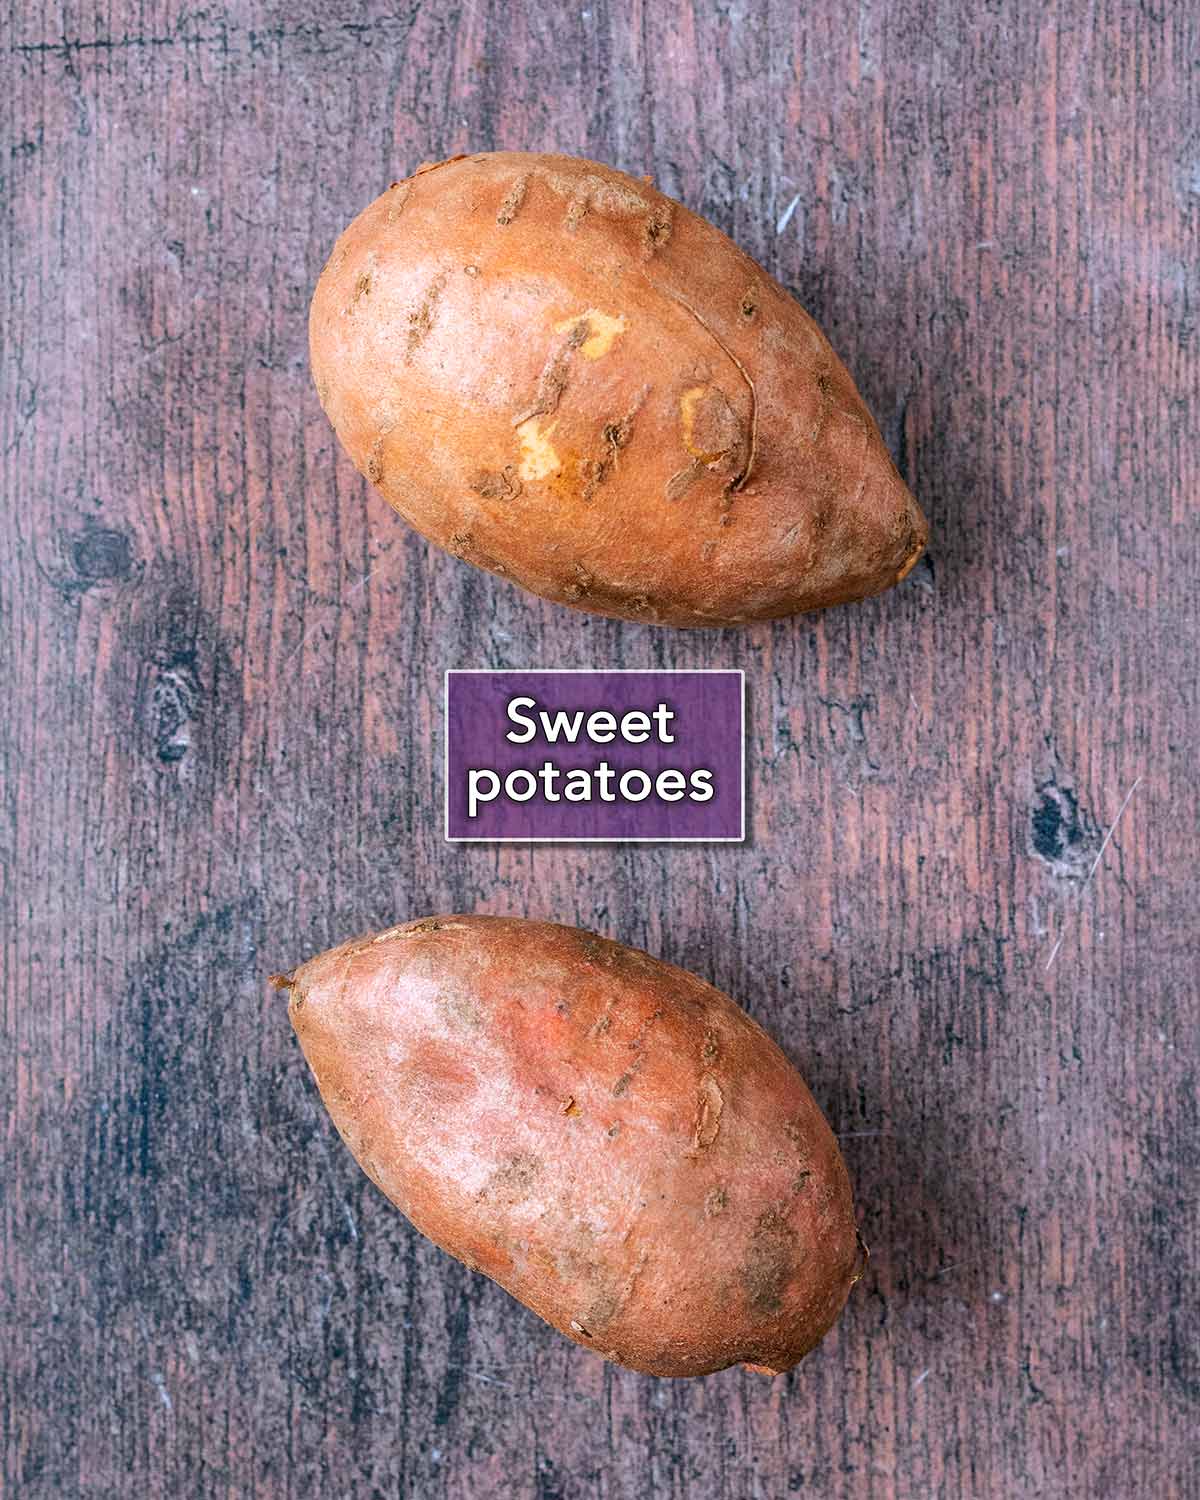 Two sweet potatoes on a wooden surface with a text label overlay.